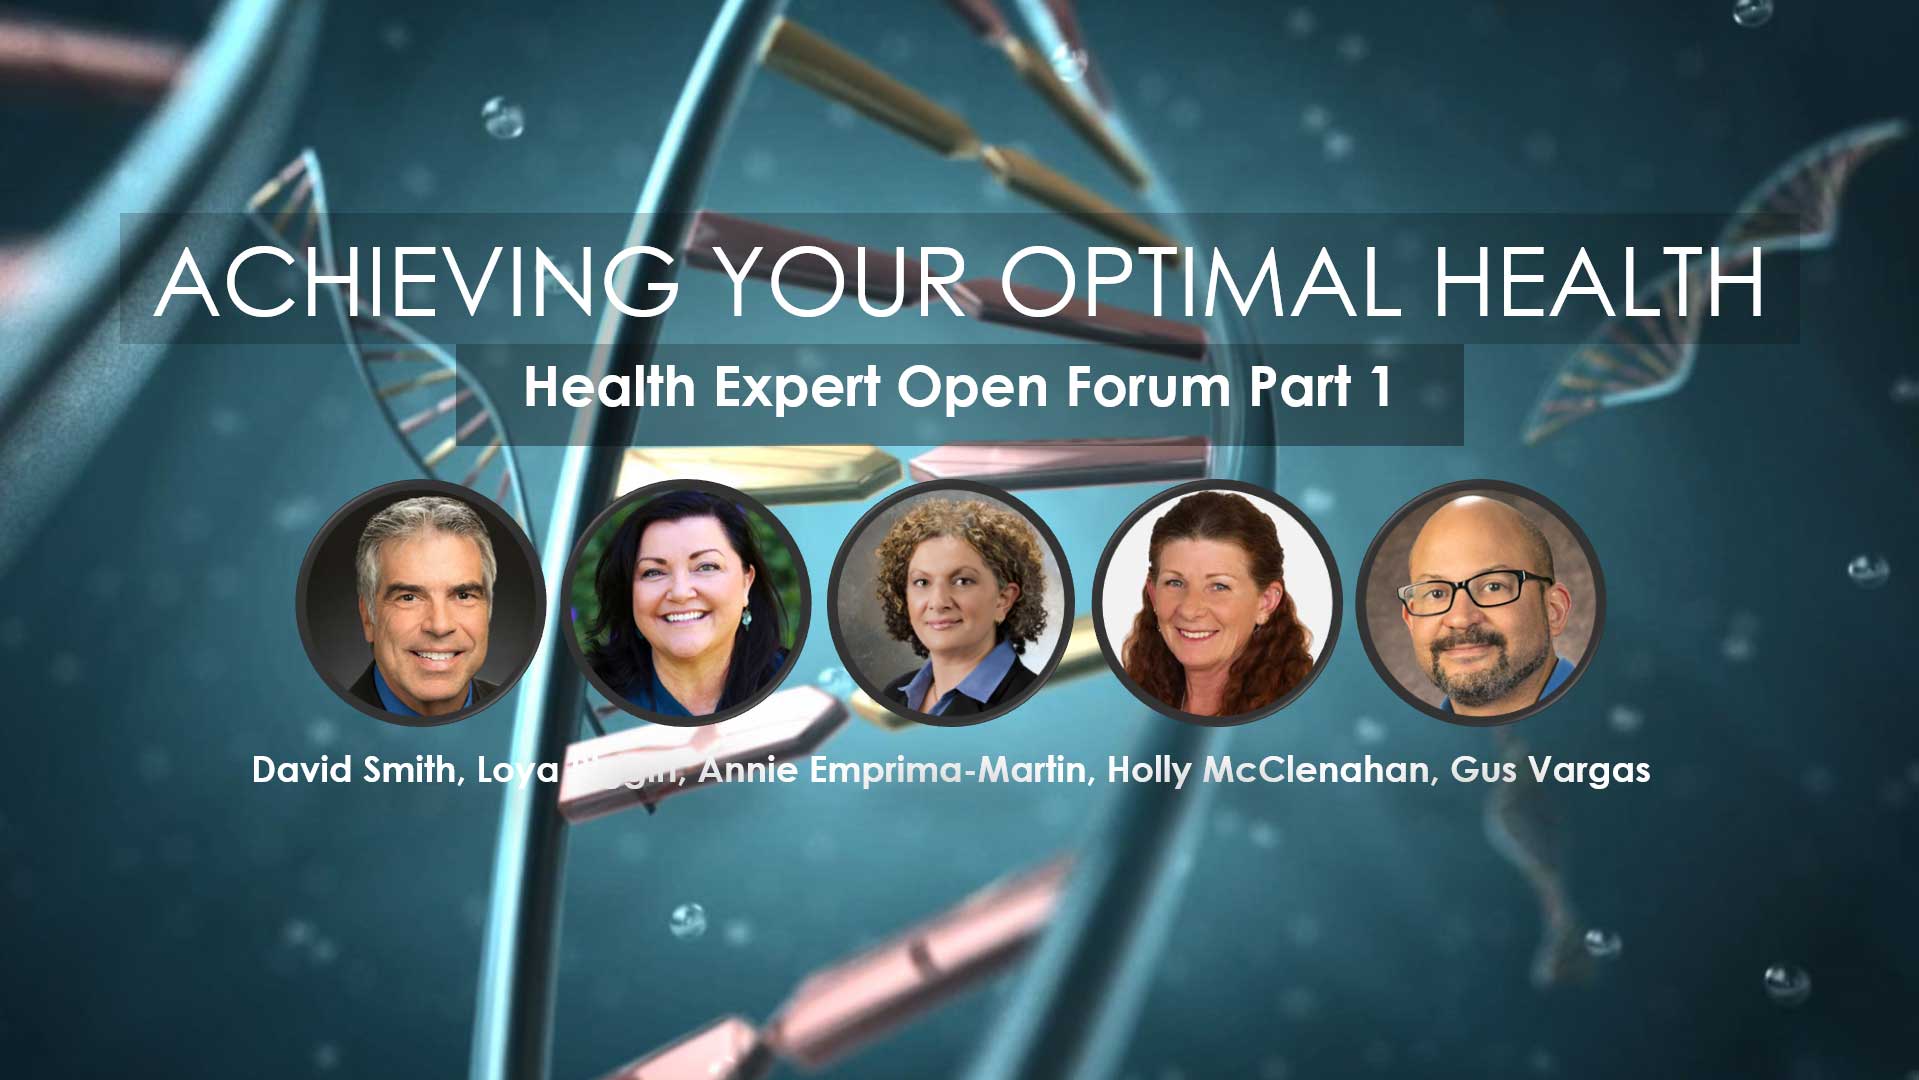 Health Expert Forum Part 1 from Webinar Series: Achieving Your Optimal Health